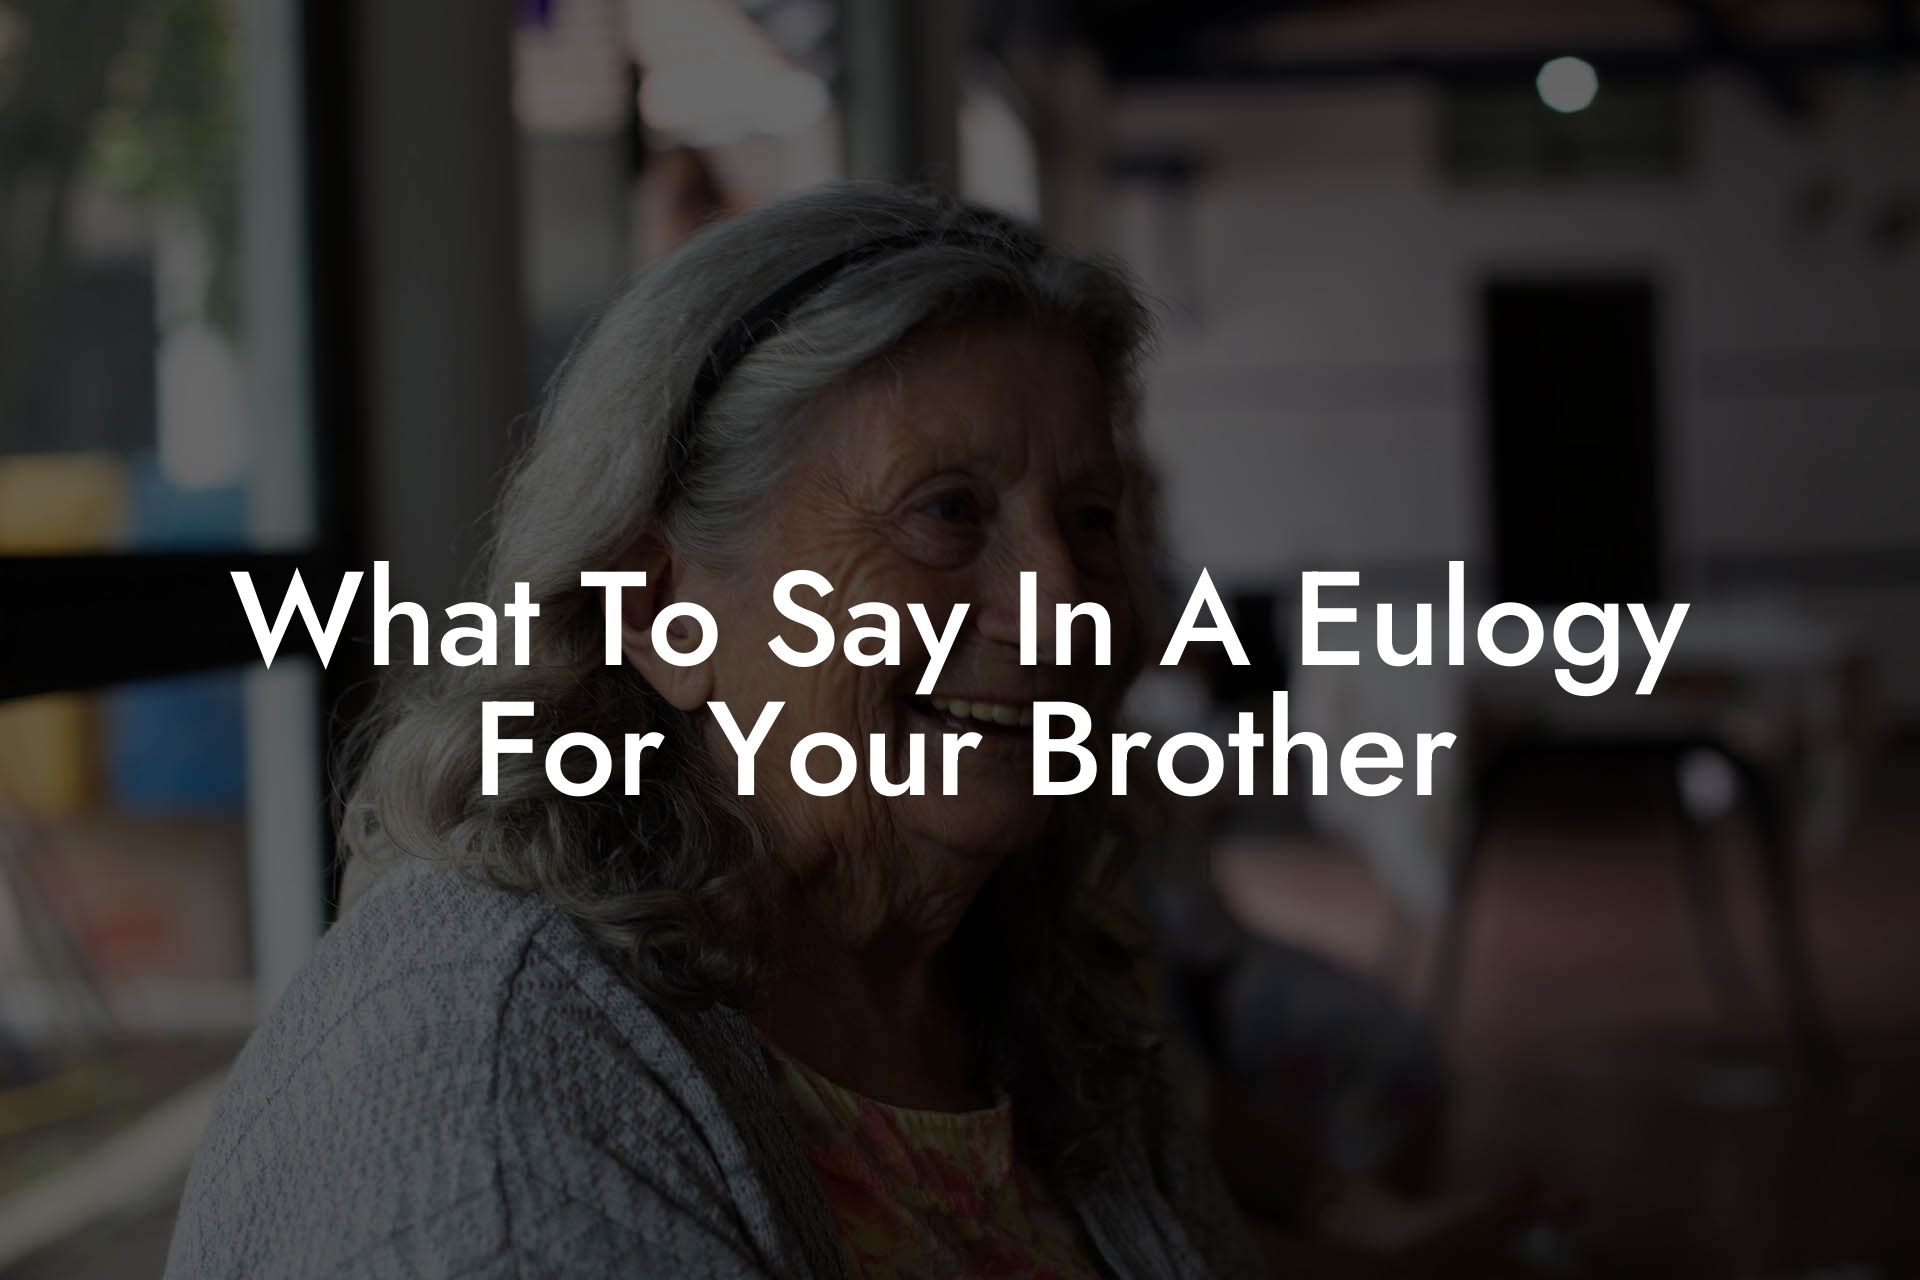 What To Say In A Eulogy For Your Brother